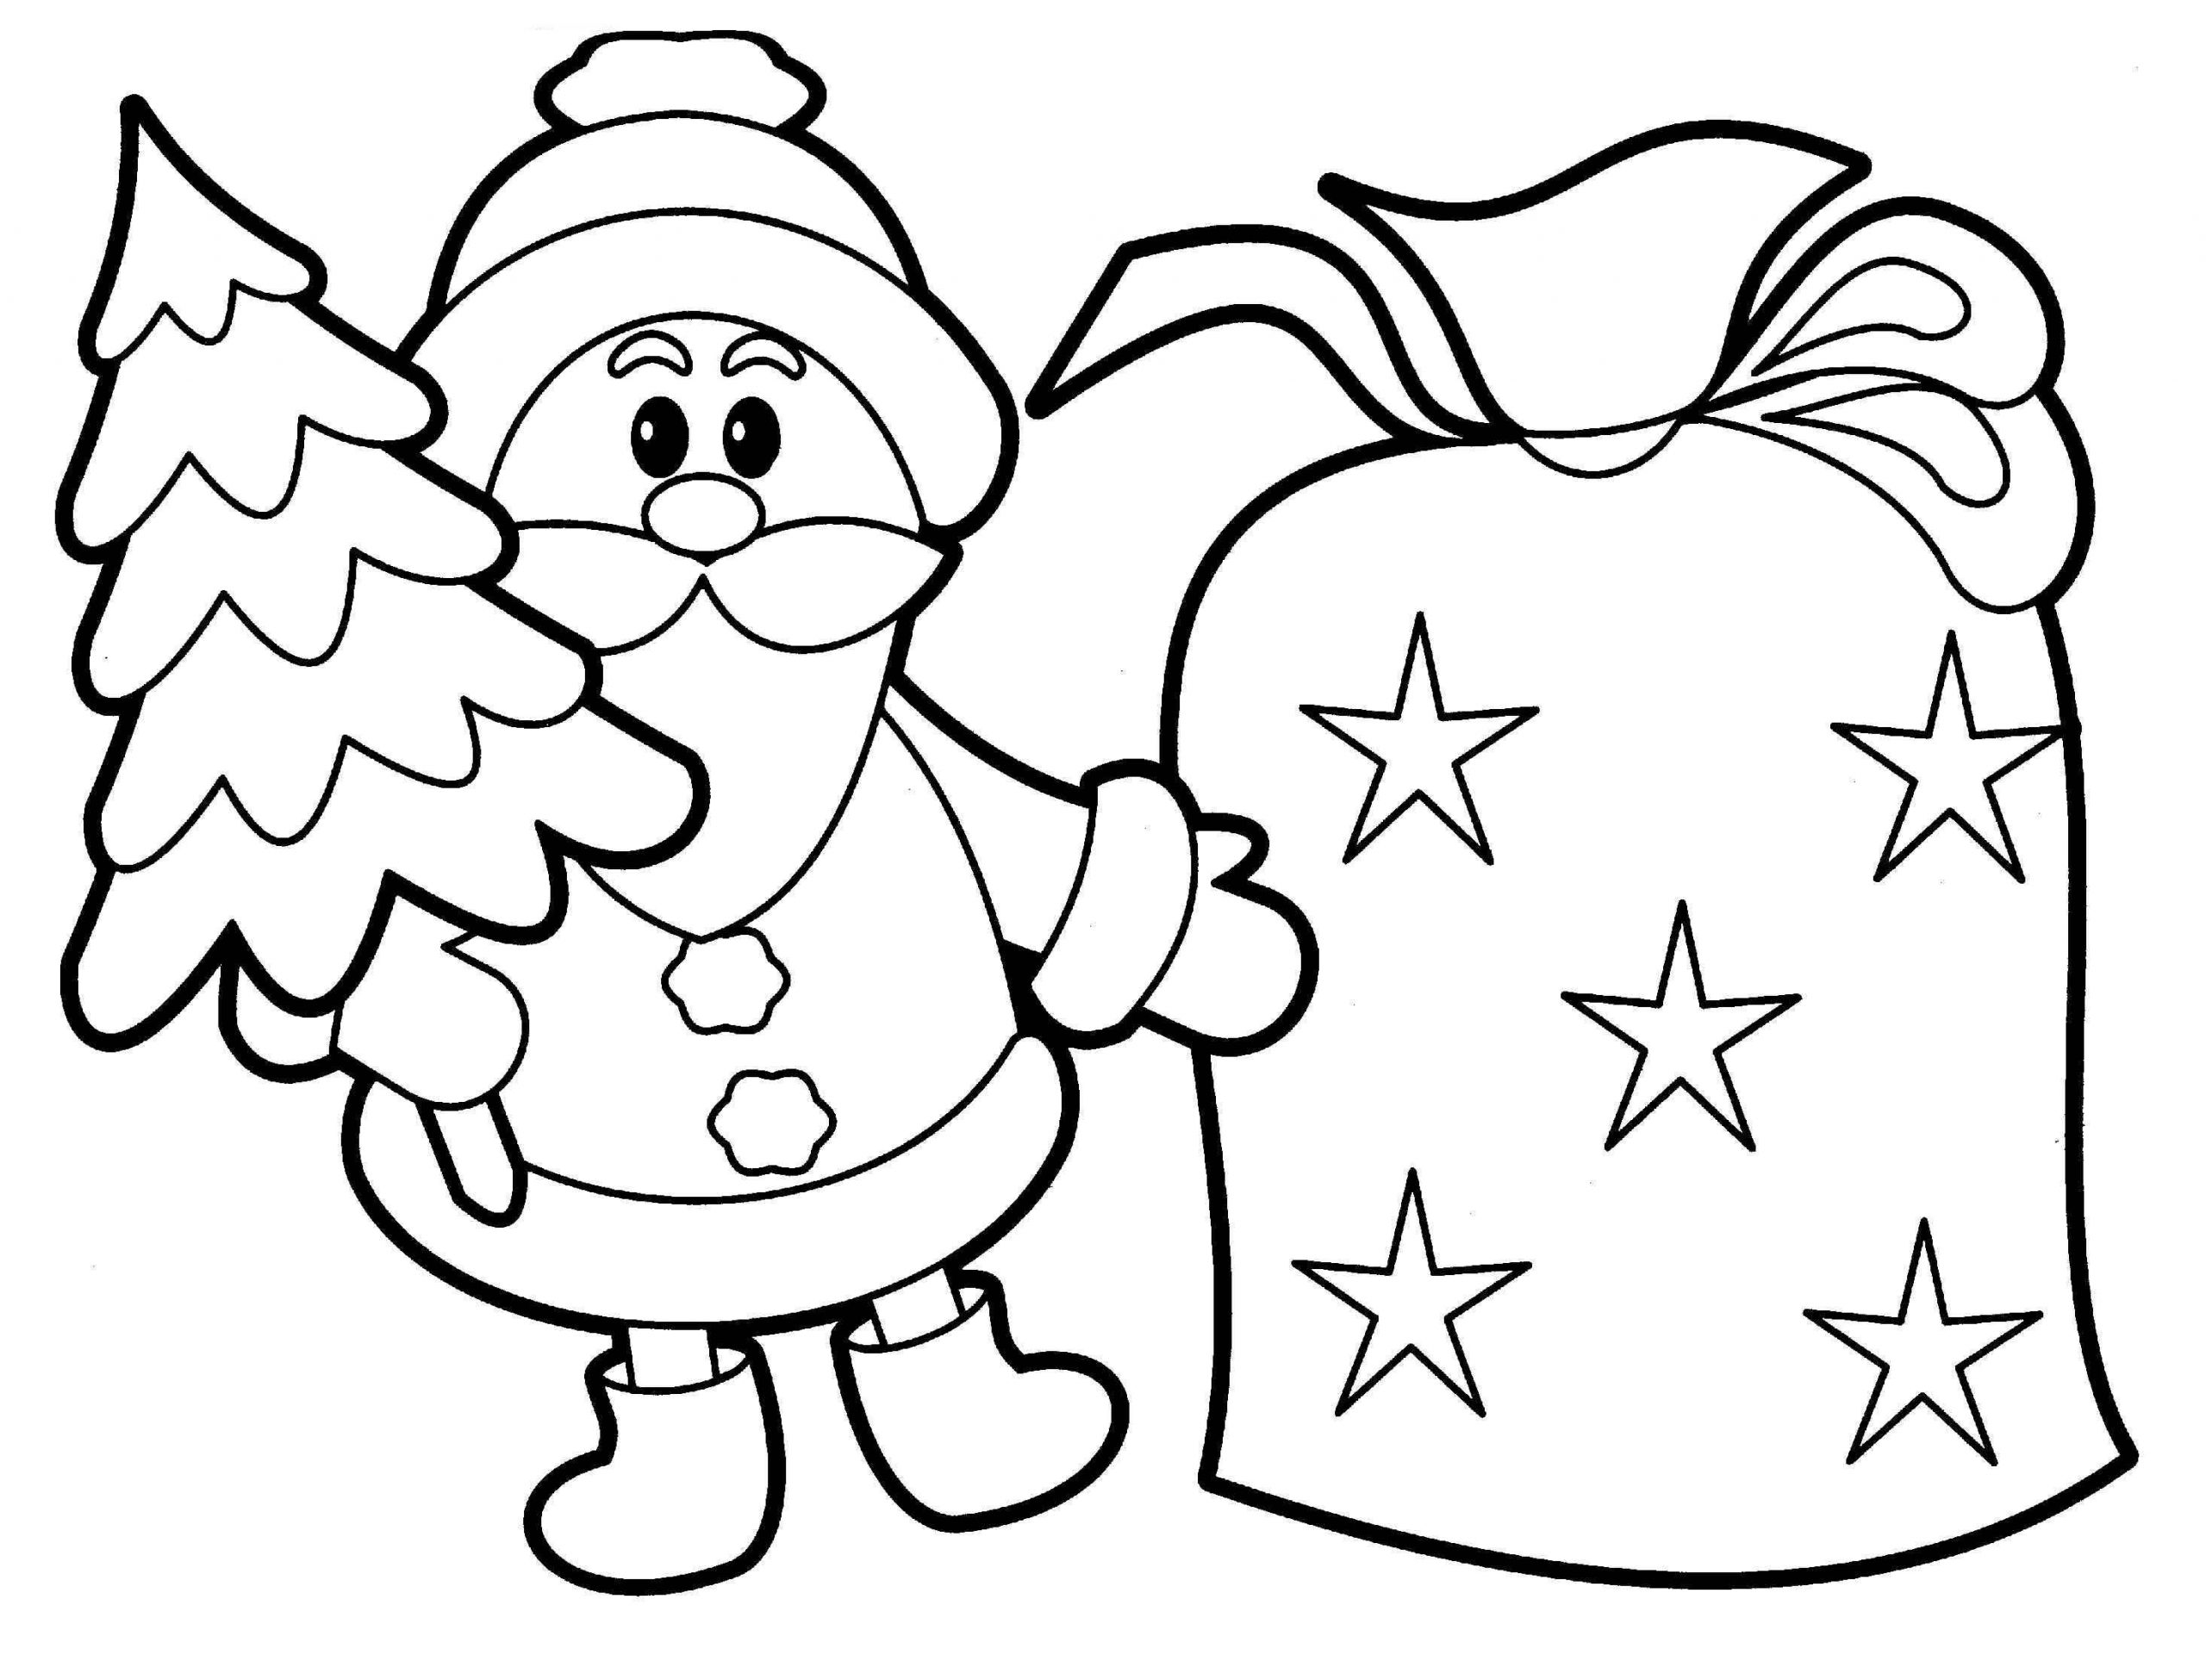 Free Printable Christmas Coloring Pages
 Free Christmas Coloring Pages Printable